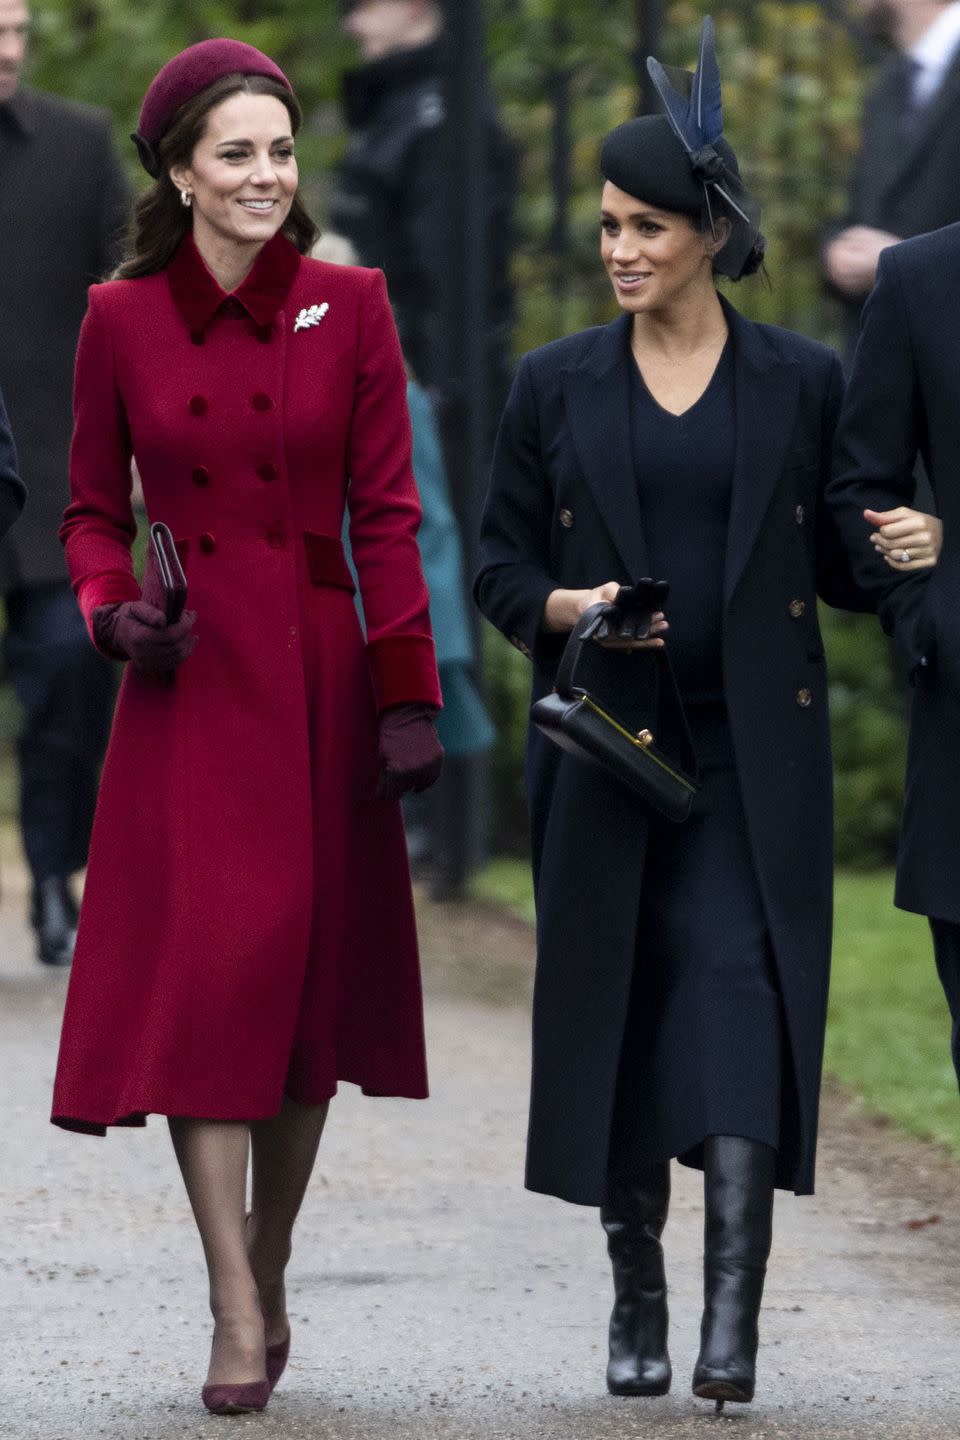 <p><strong>December 2018 </strong>The Duchess of Cambridge and the Duchess of Sussex attended a Christmas Day service in smart burgundy and navy outfits. Meghan chose a Victoria Beckham look. </p>